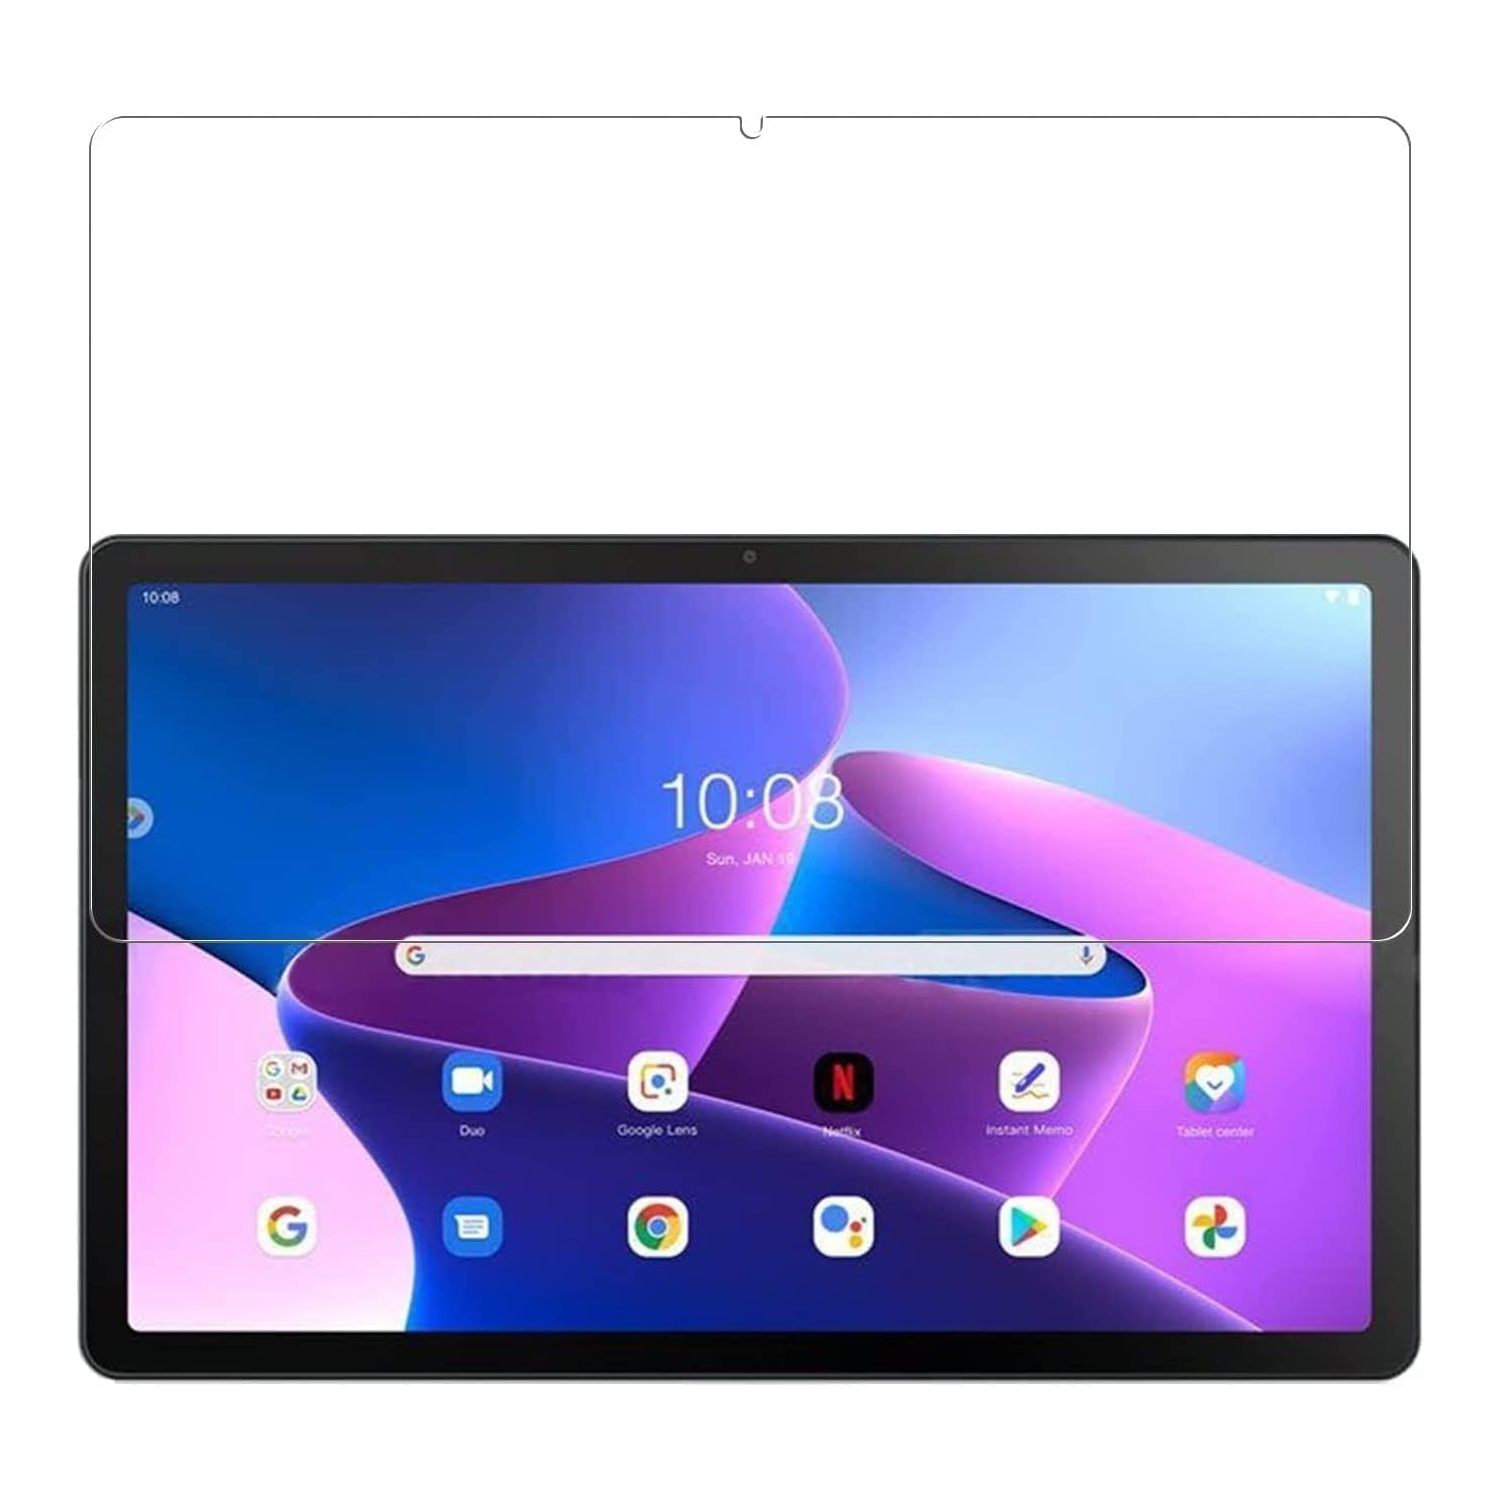 1-Pack Screen Protector for Lenovo Tab M10 Plus 3rd Gen 10.6 Inch Tablet, Tempered Glass Screen Film for Lenovo